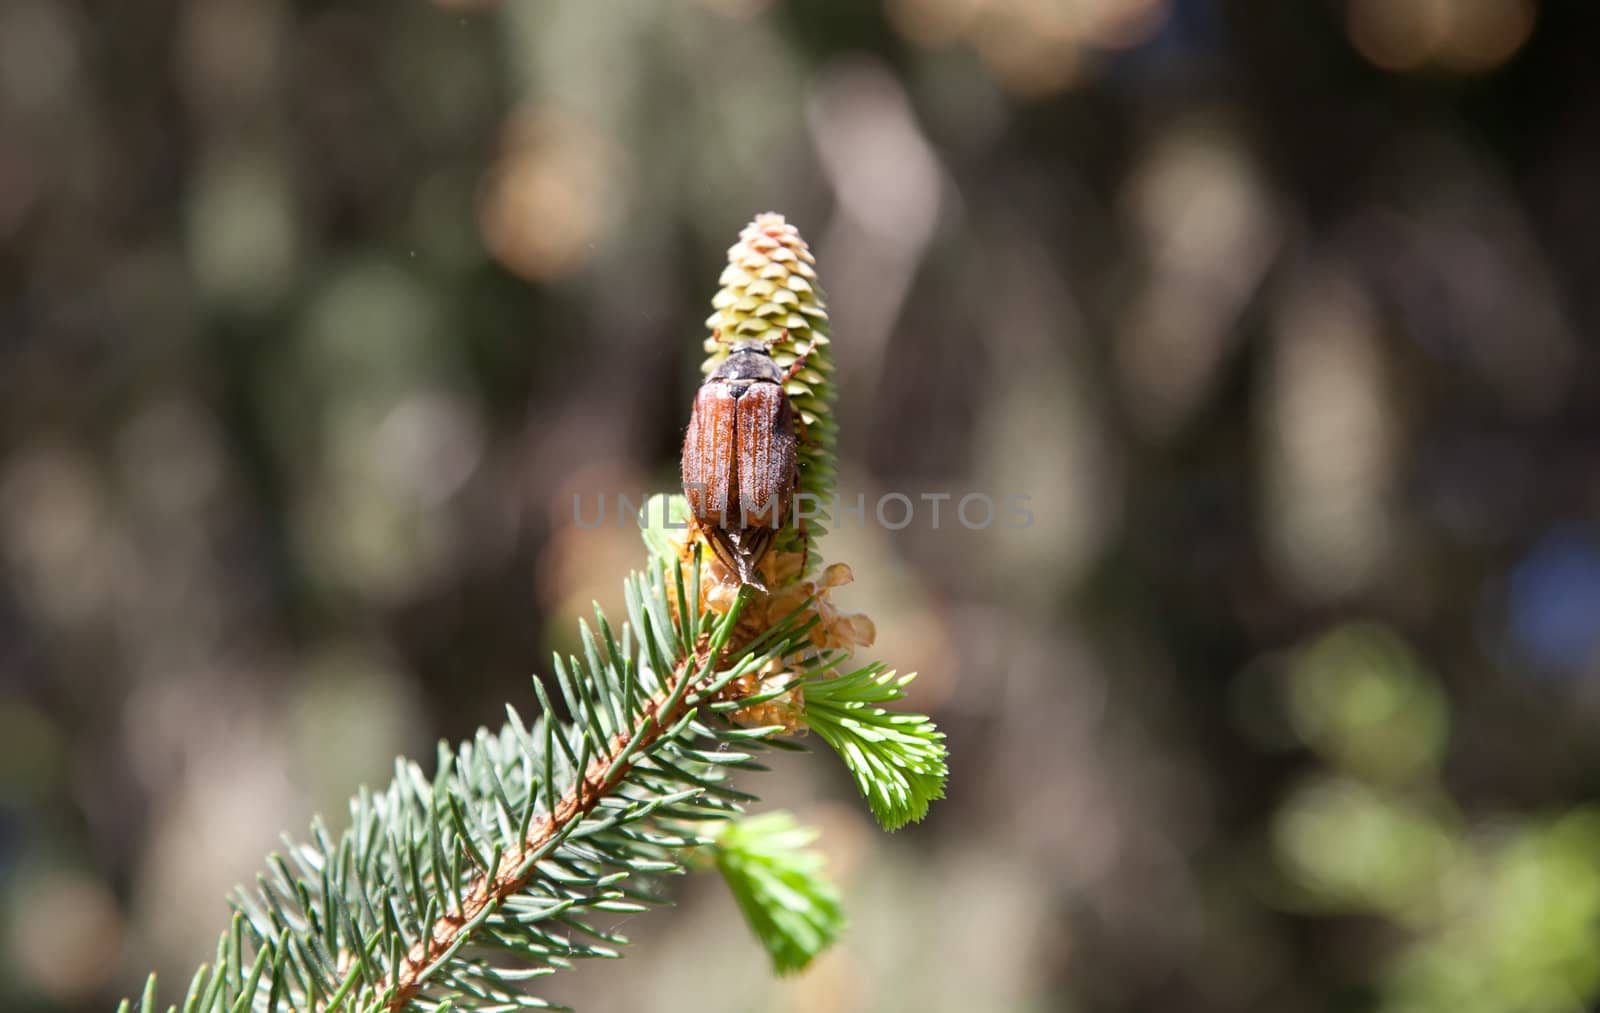 May bug on pine cone in spring